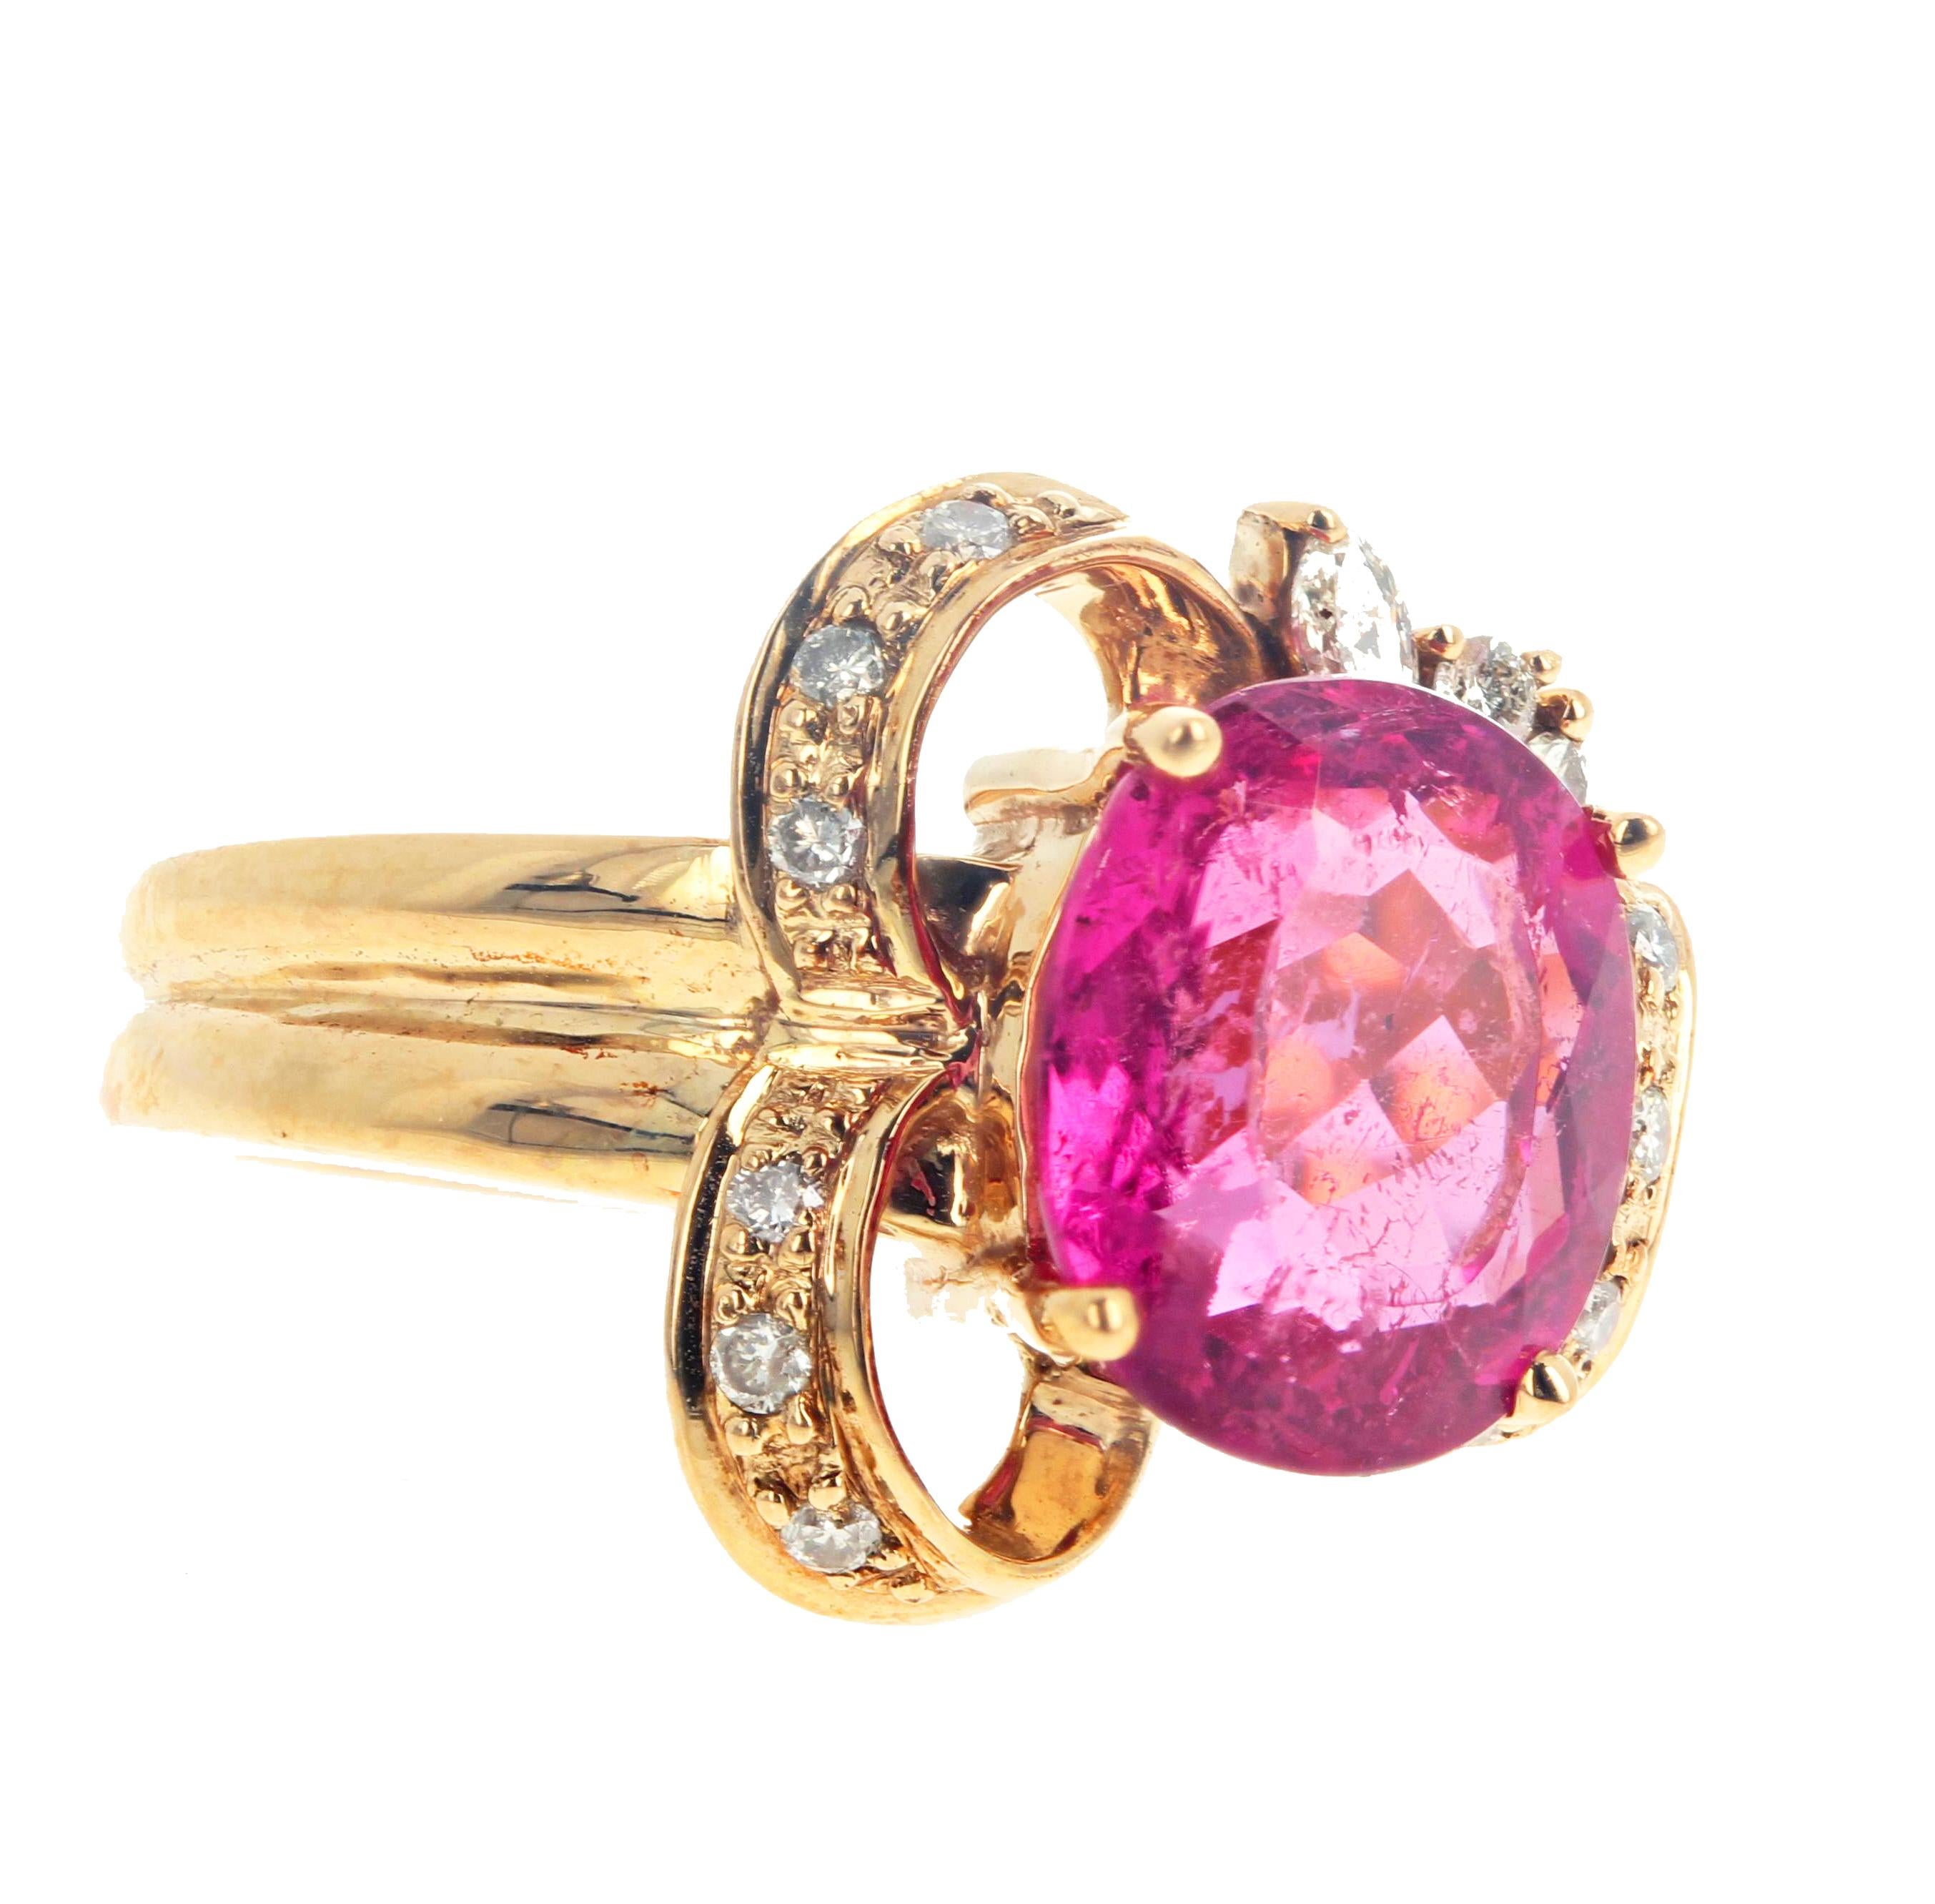 This beautiful ring setting replicates the shape of a bow with small sparkling white diamond enhancements and a magnificent center 3.7 carats oval Rubelite Tourmaline (10.4 mm x 9 mm).  This beautiful unique ring is a size 7 sizable for free.  It is